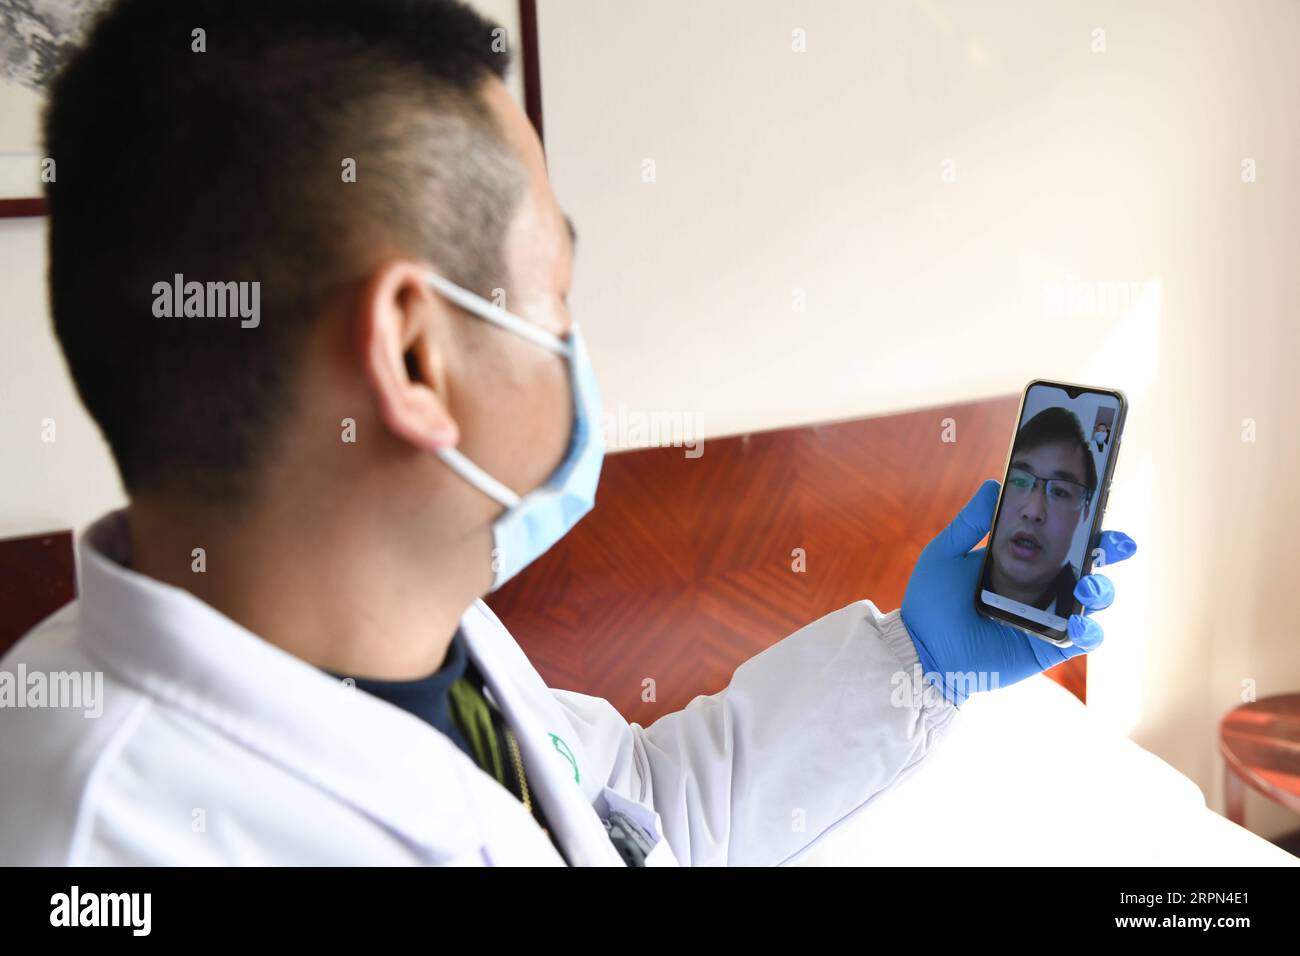 200222 -- HEFEI, Feb. 22, 2020 -- Health worker Li Hao of Yonghe health station in Changning Community has a video chat with a staff member in quarantine who didn t feel well a couple of days ago in Hefei, east China s Anhui Province, Feb. 21, 2020. Thirty five staff members of the Anhui Branch of China Construction Eighth Engineering Division Corp. Ltd., who attended the construction of the makeshift Leishenshan hospital for novel coronavirus pneumonia patients in Wuhan, have recently come back to Hefei. They are now in quarantine for medical observation in a hotel in Hefei. Each of them has Stock Photo